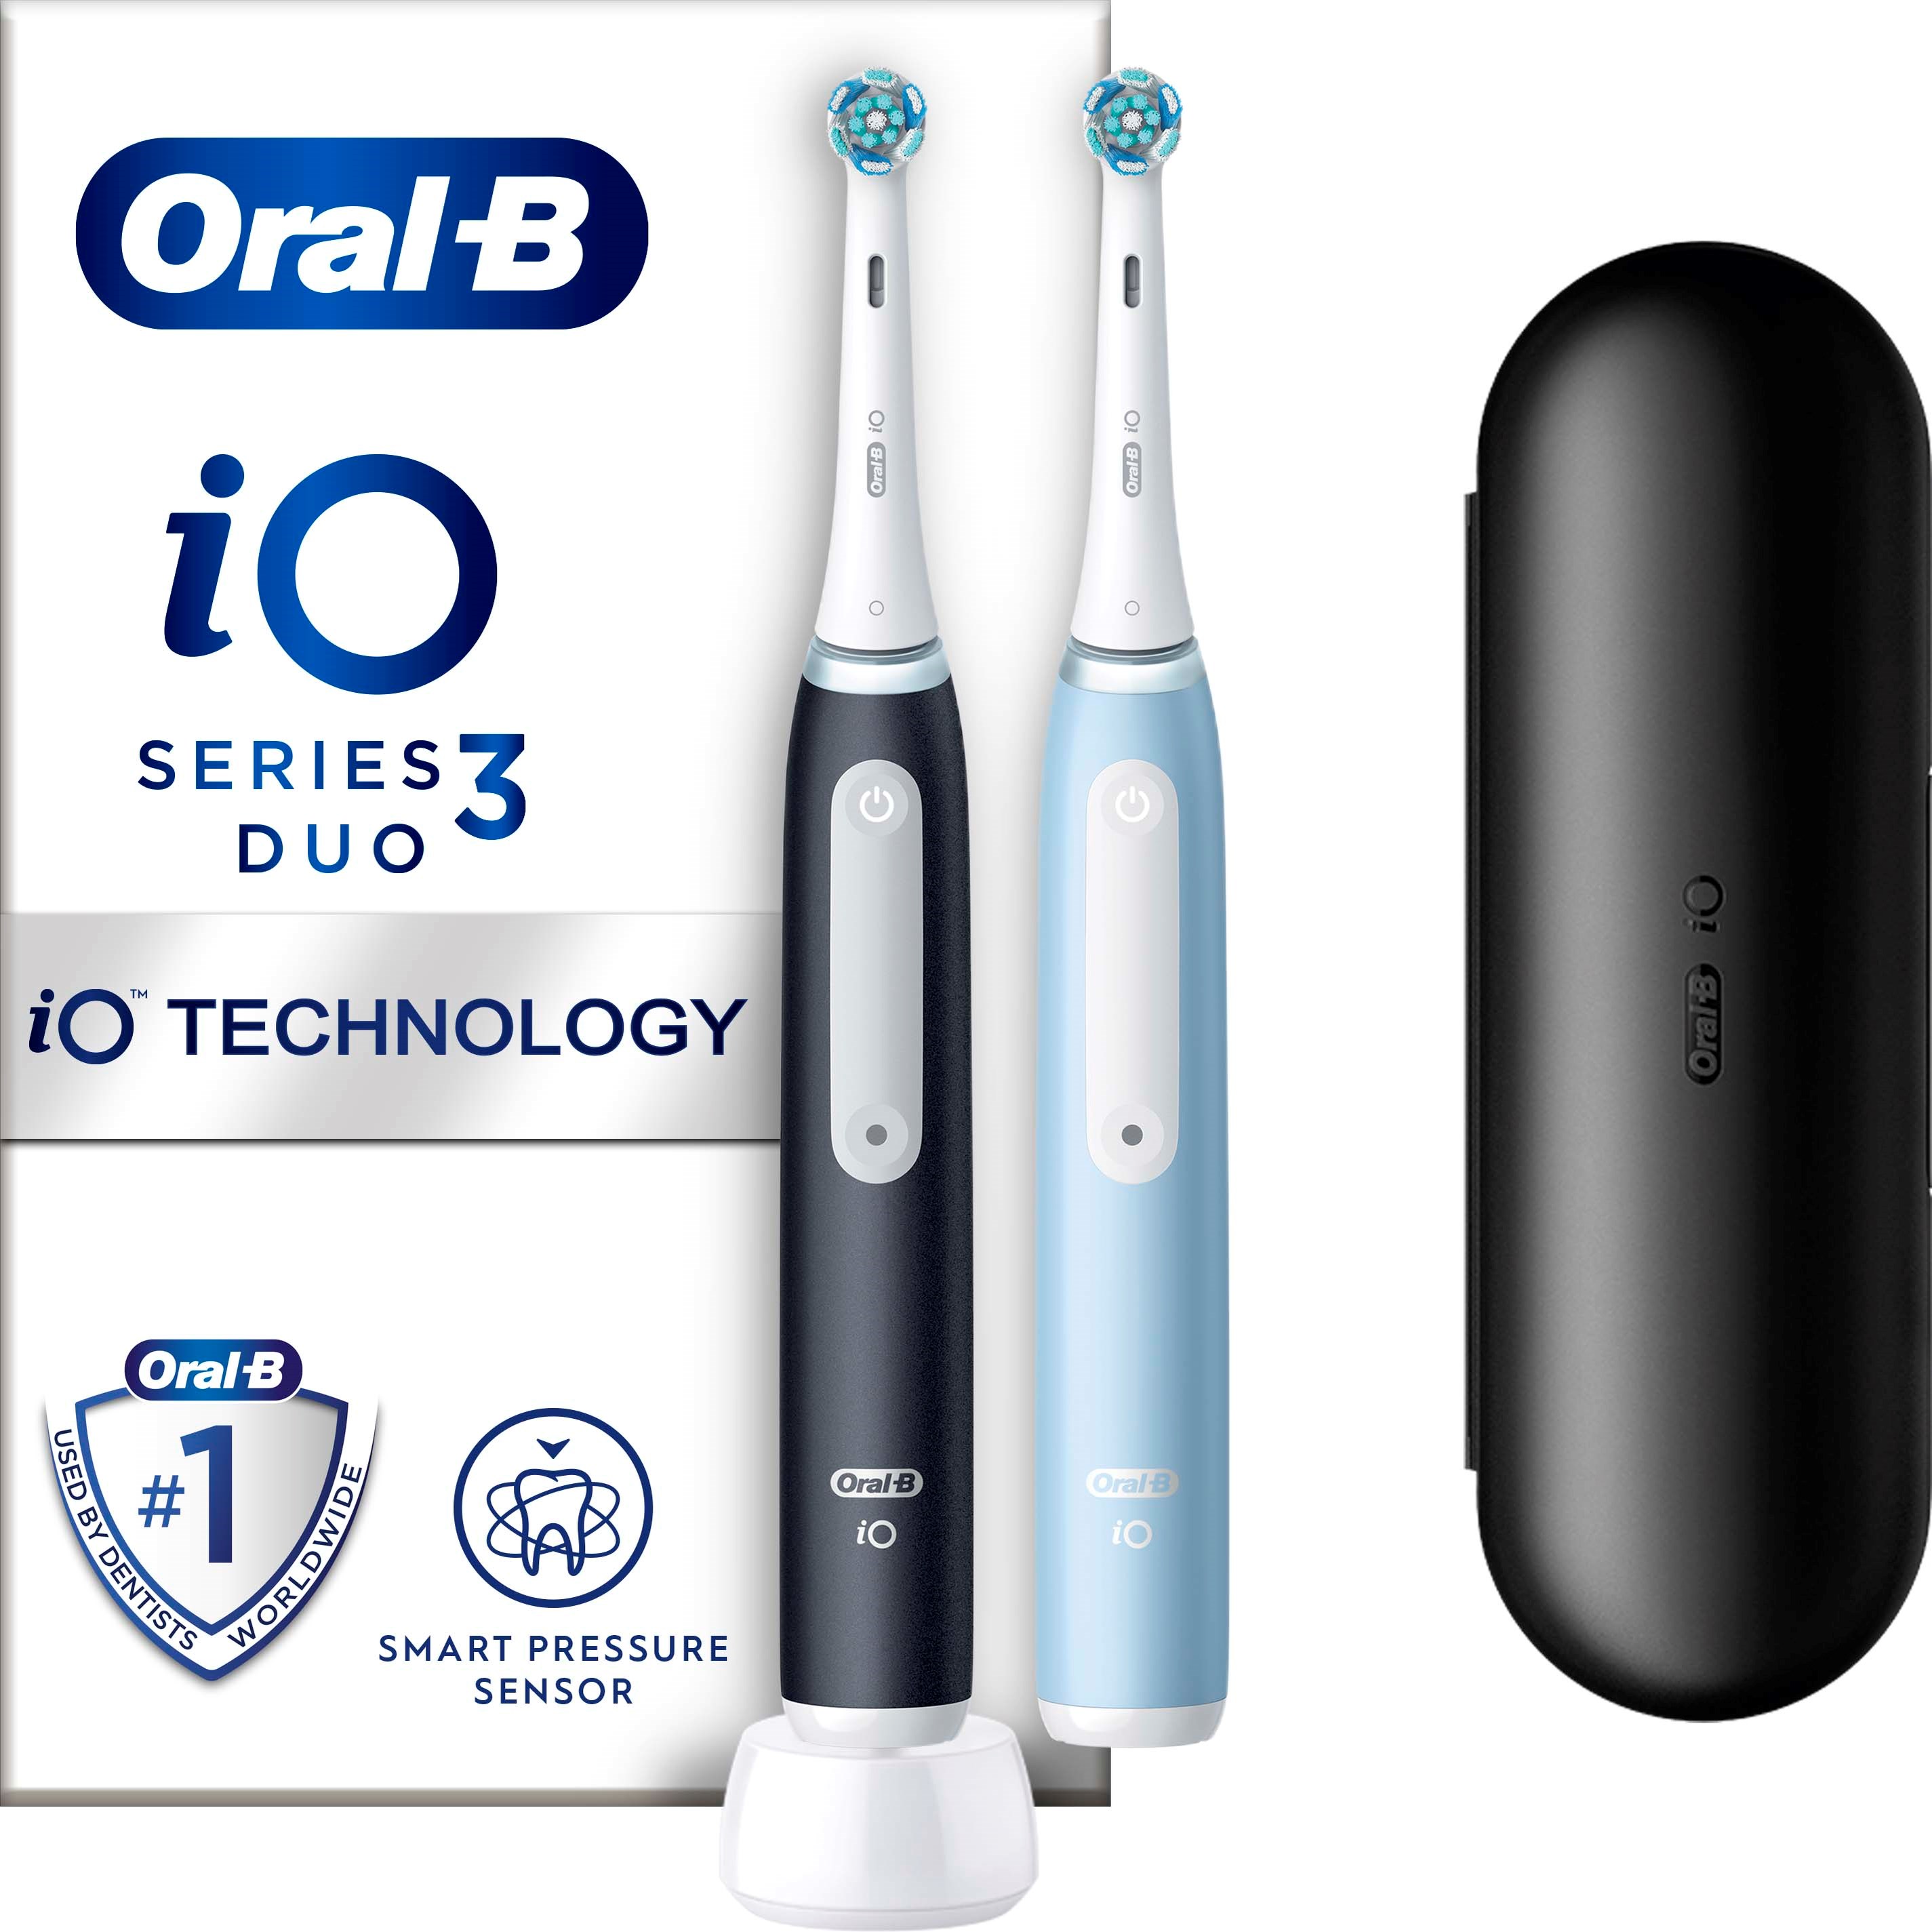 Oral B iO 3 Black & Blue Electric Toothbrushes Designed By Braun